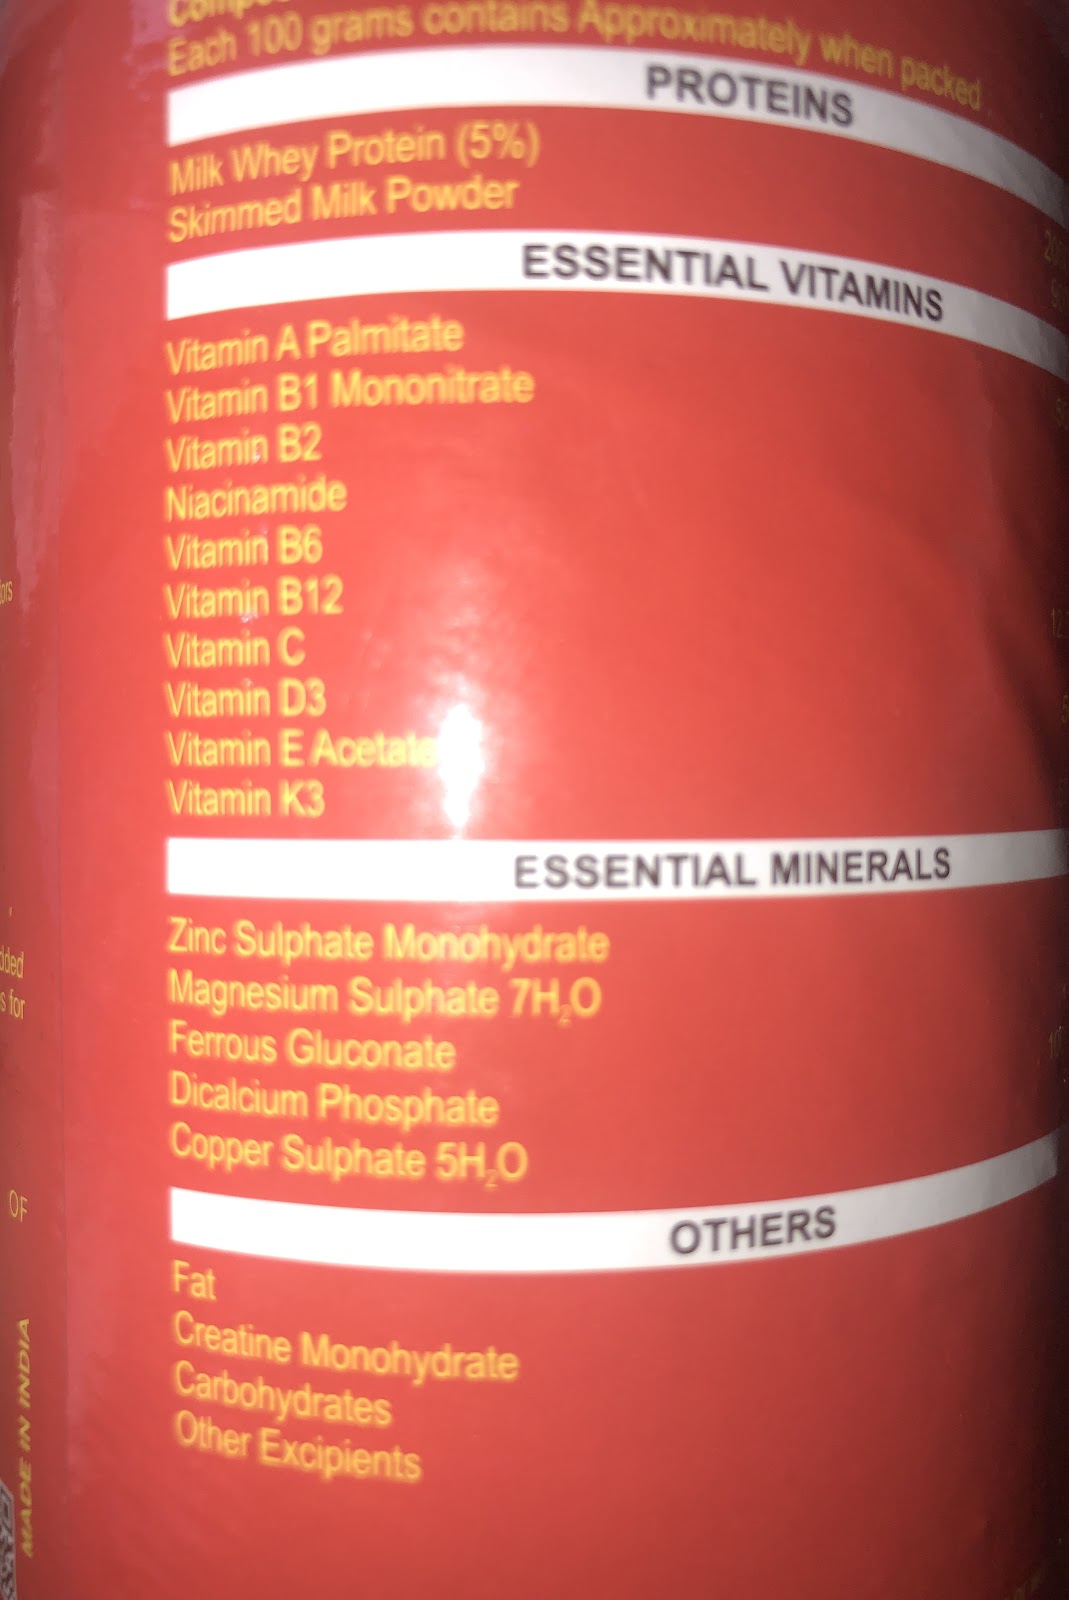 The Nutrient Composition of RonVit Body Dietary Supplement